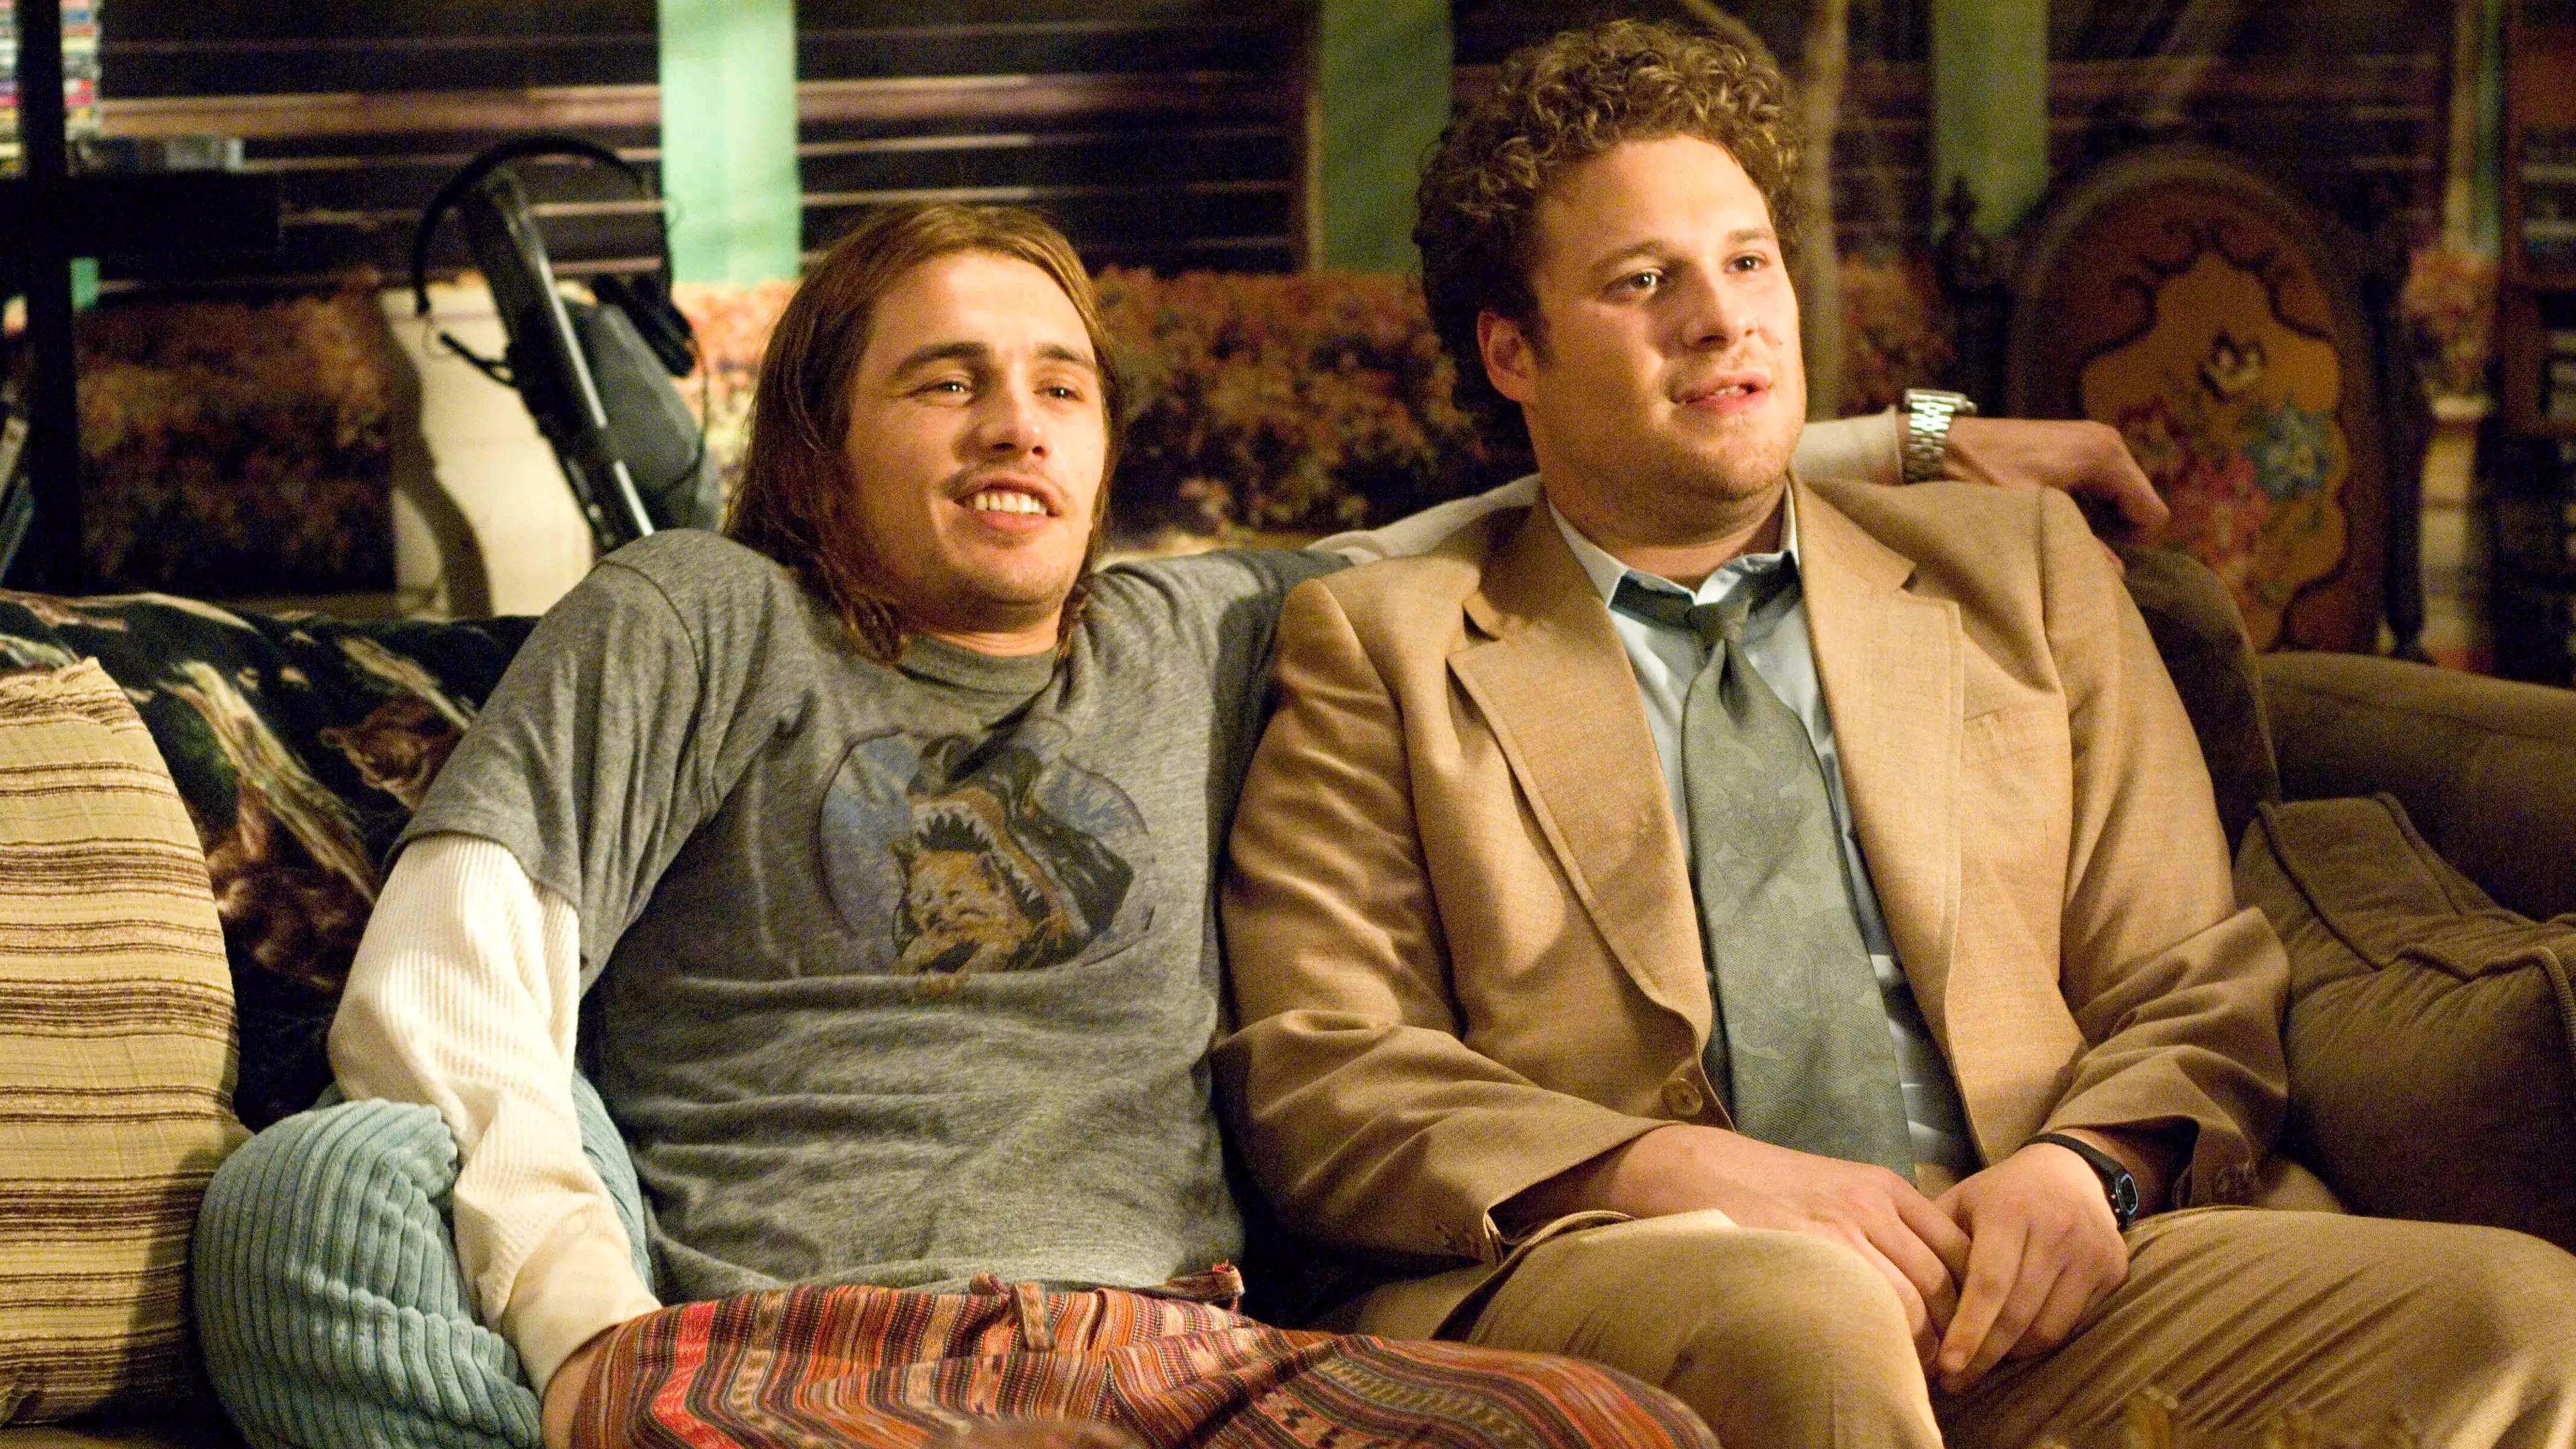 Men Have More Fun Hanging Out With Men Than Their Girlfriend, Study Claims